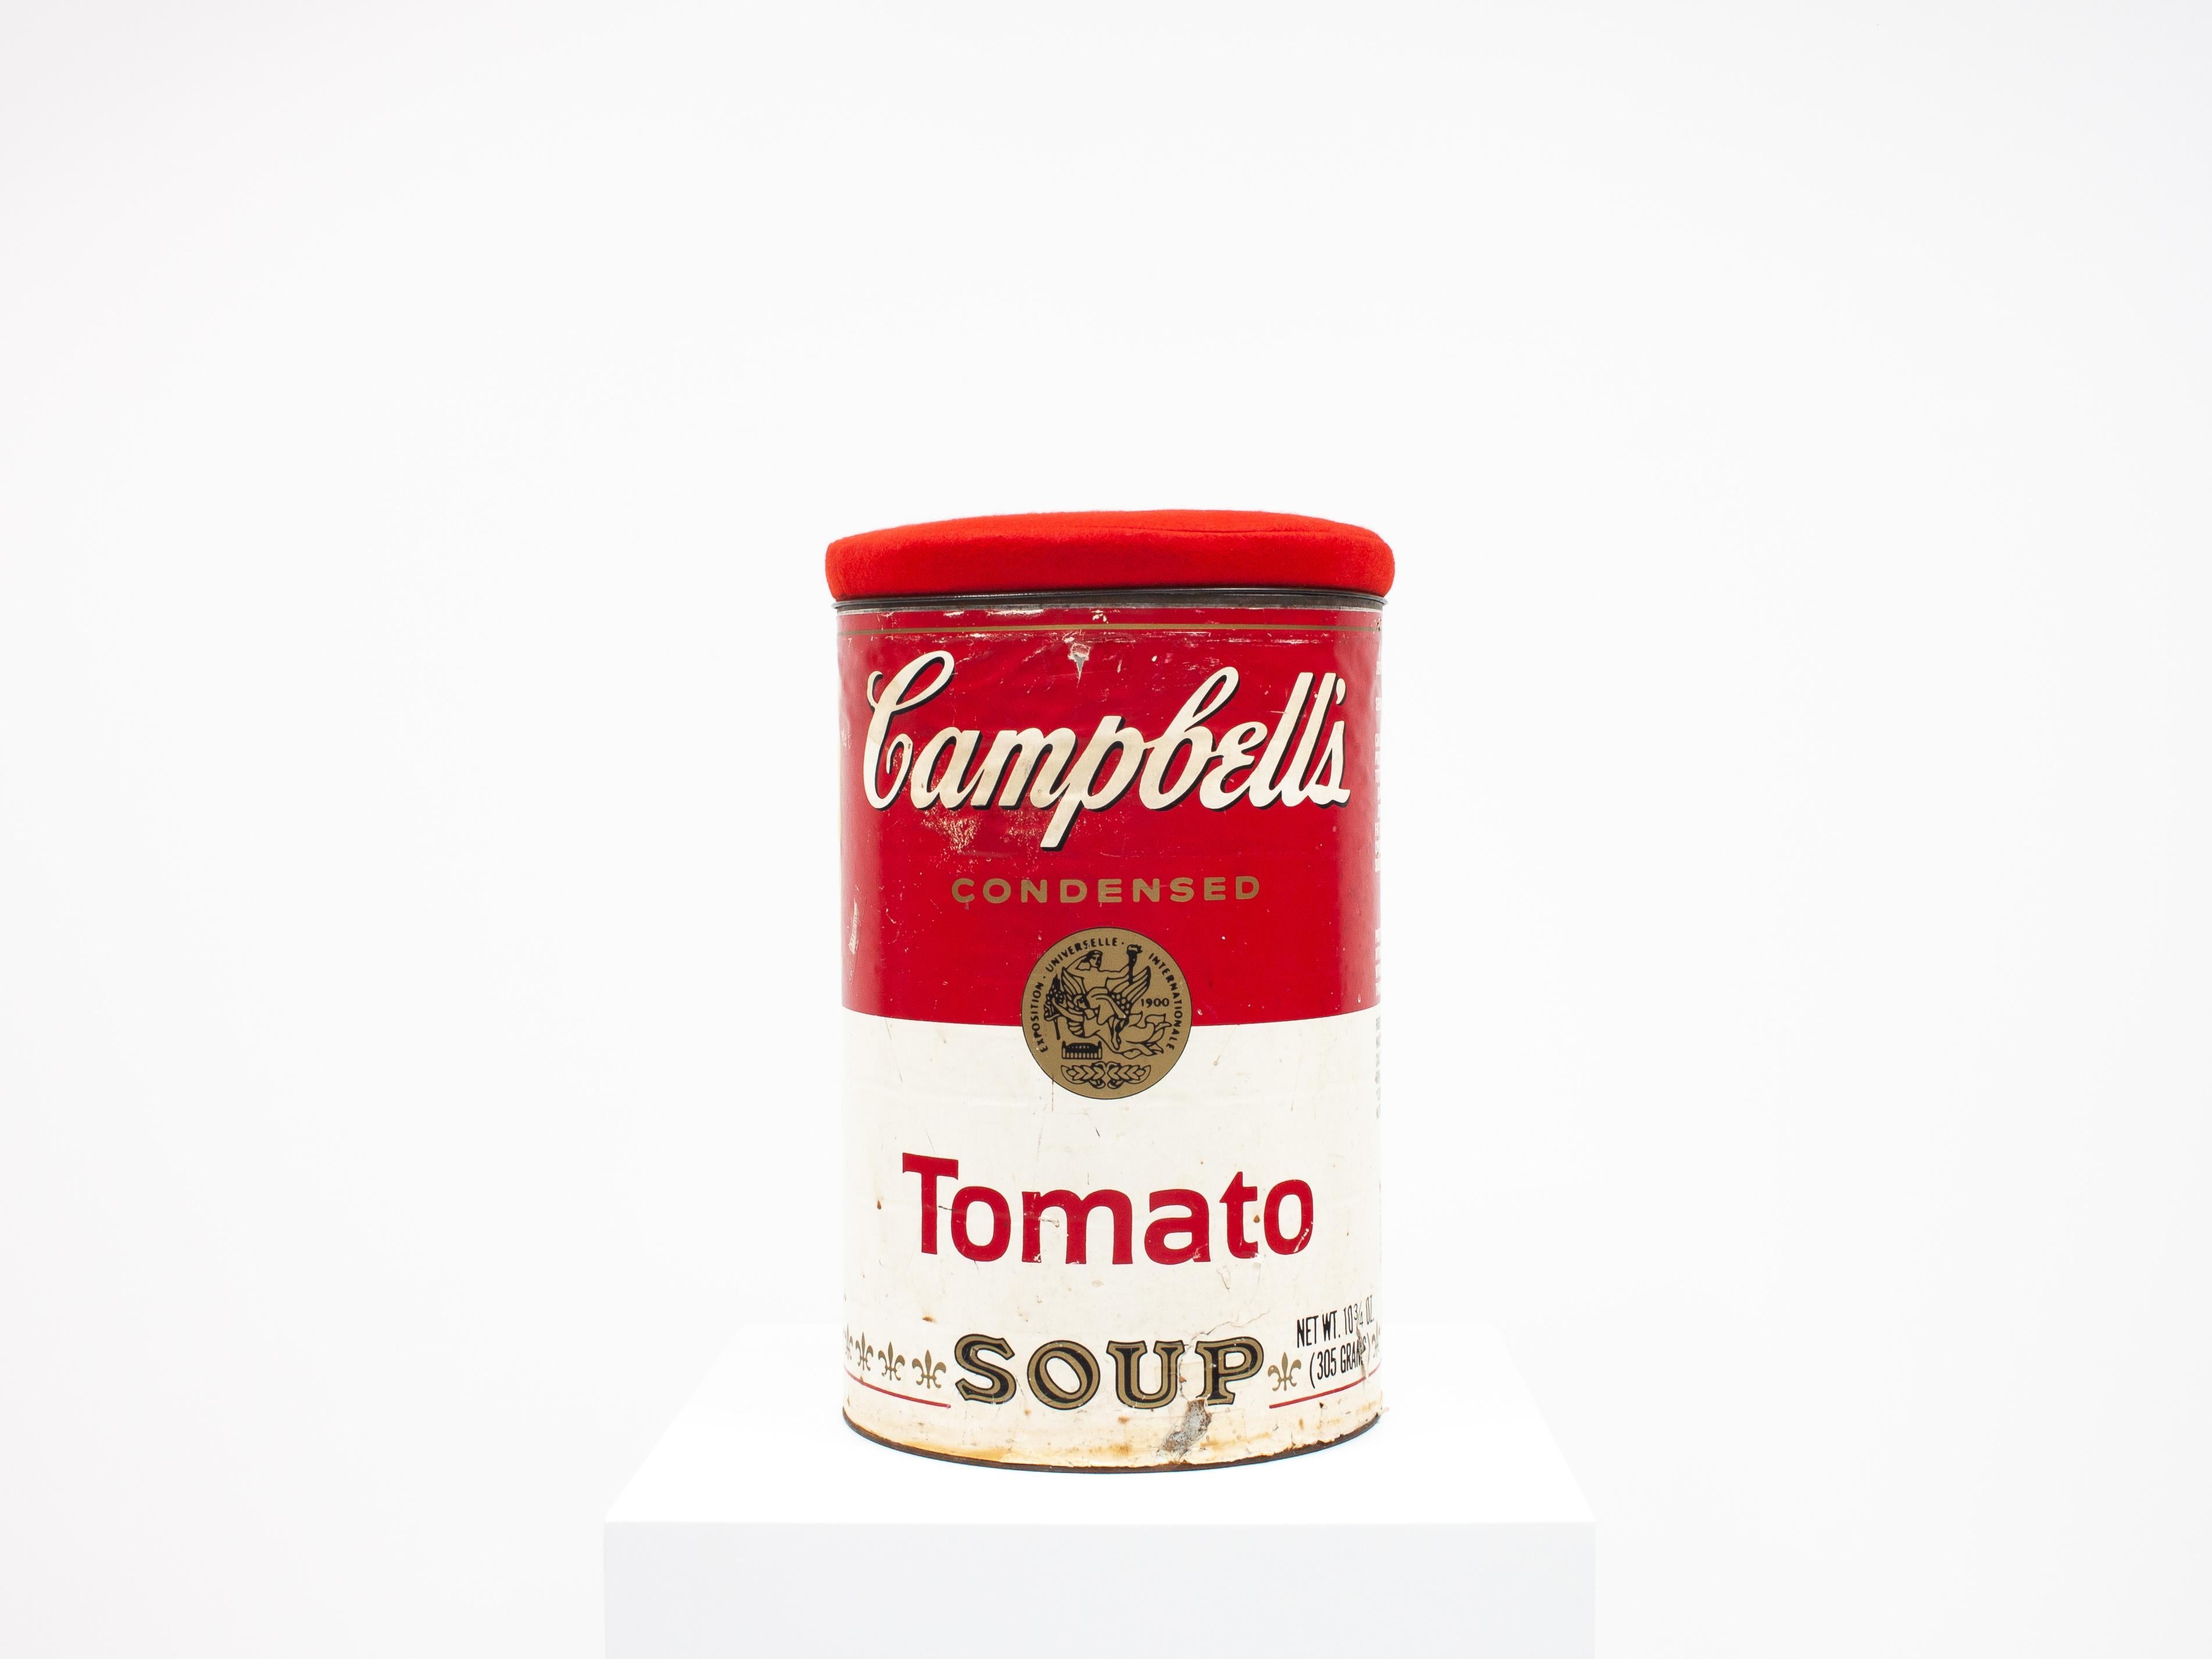 An oversized Campbells soup can stool by Think Big! NYC, dating from 1986.

Think Big retail store was originally established in New York City in 1979, initially the product line started with a small offering consisting of giant 6-foot pencils and